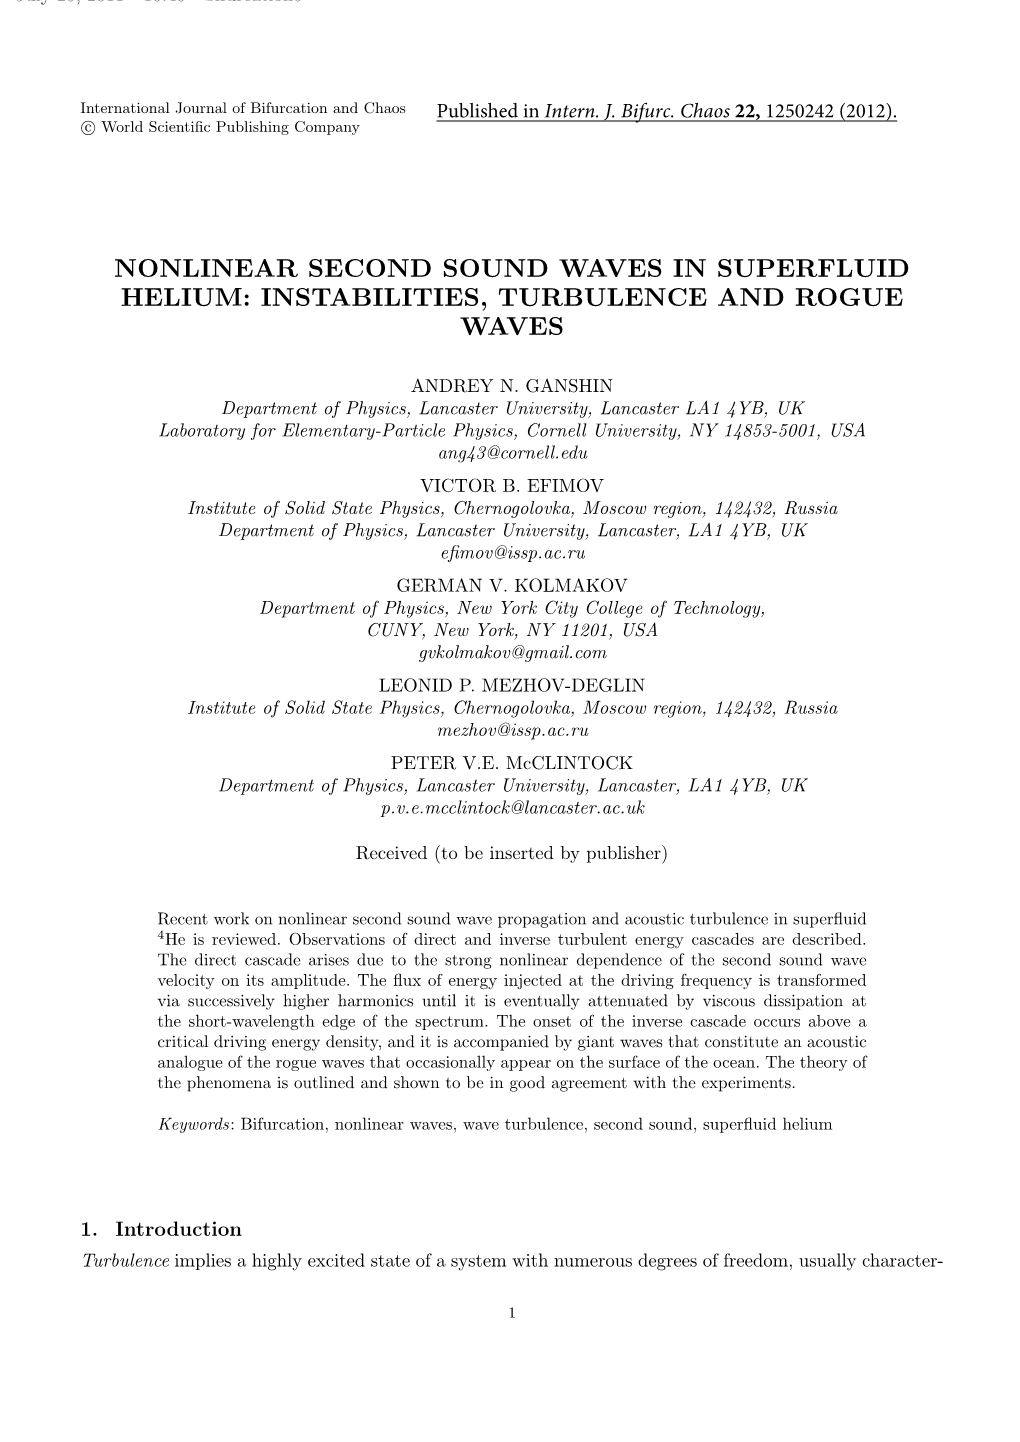 Nonlinear Second Sound Waves in Superfluid Helium: Instabilities, Turbulence and Rogue Waves